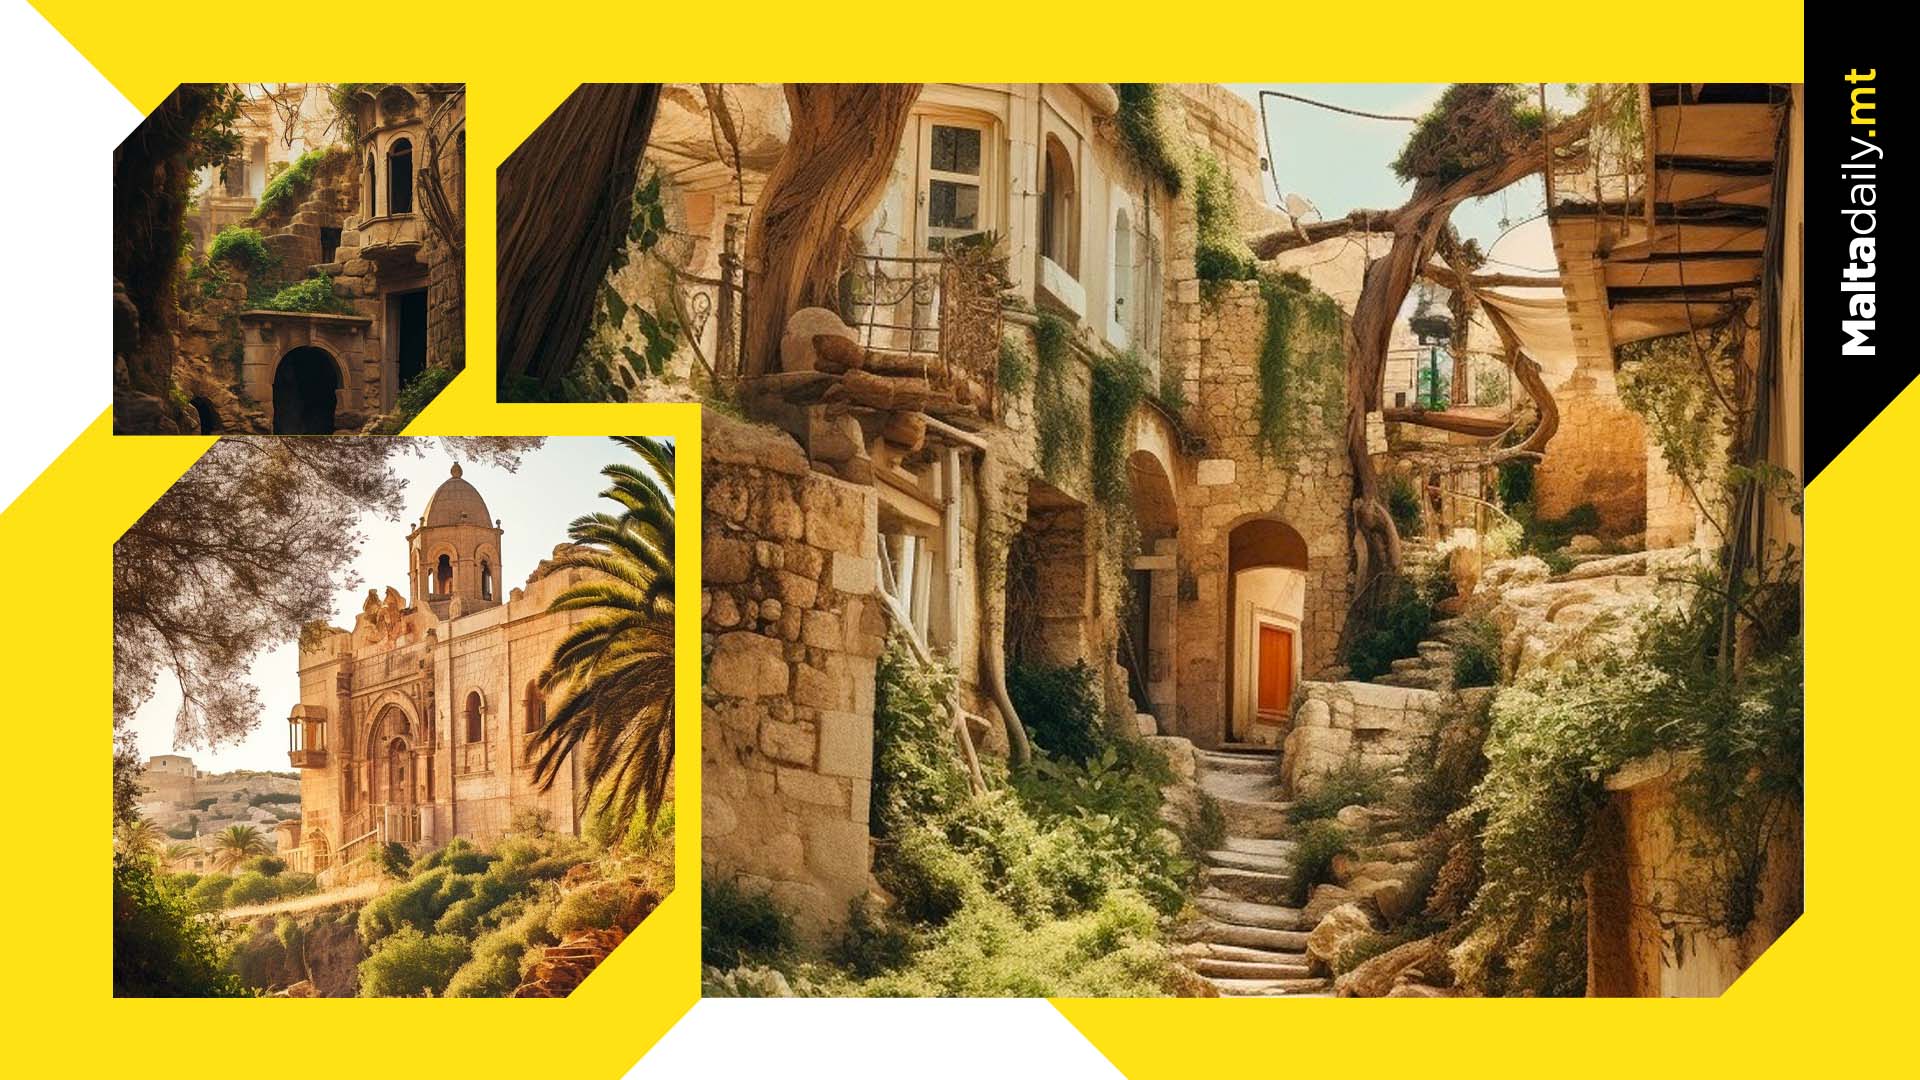 What If Malta’s Old City Was Reclaimed By Nature?